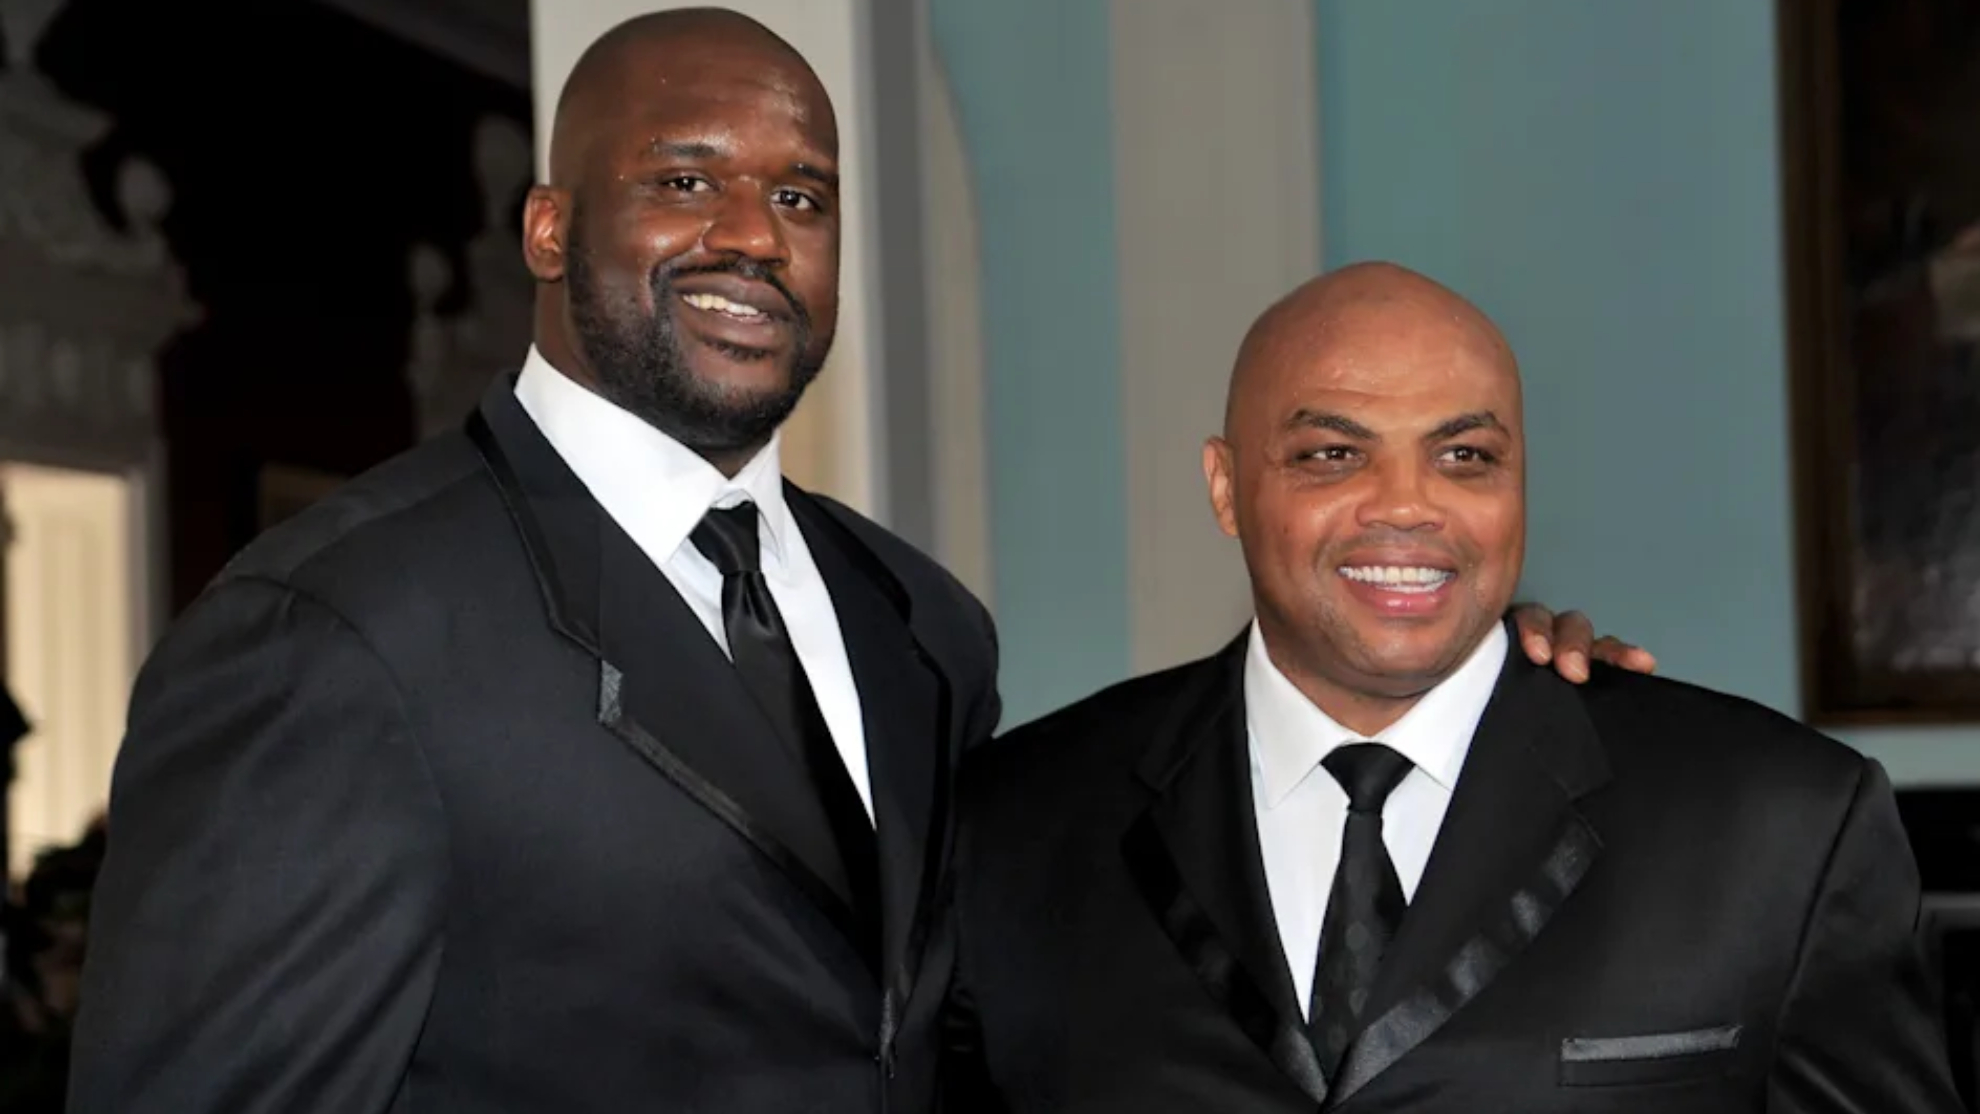 Shaquille O'Neal and Charles Barkley.